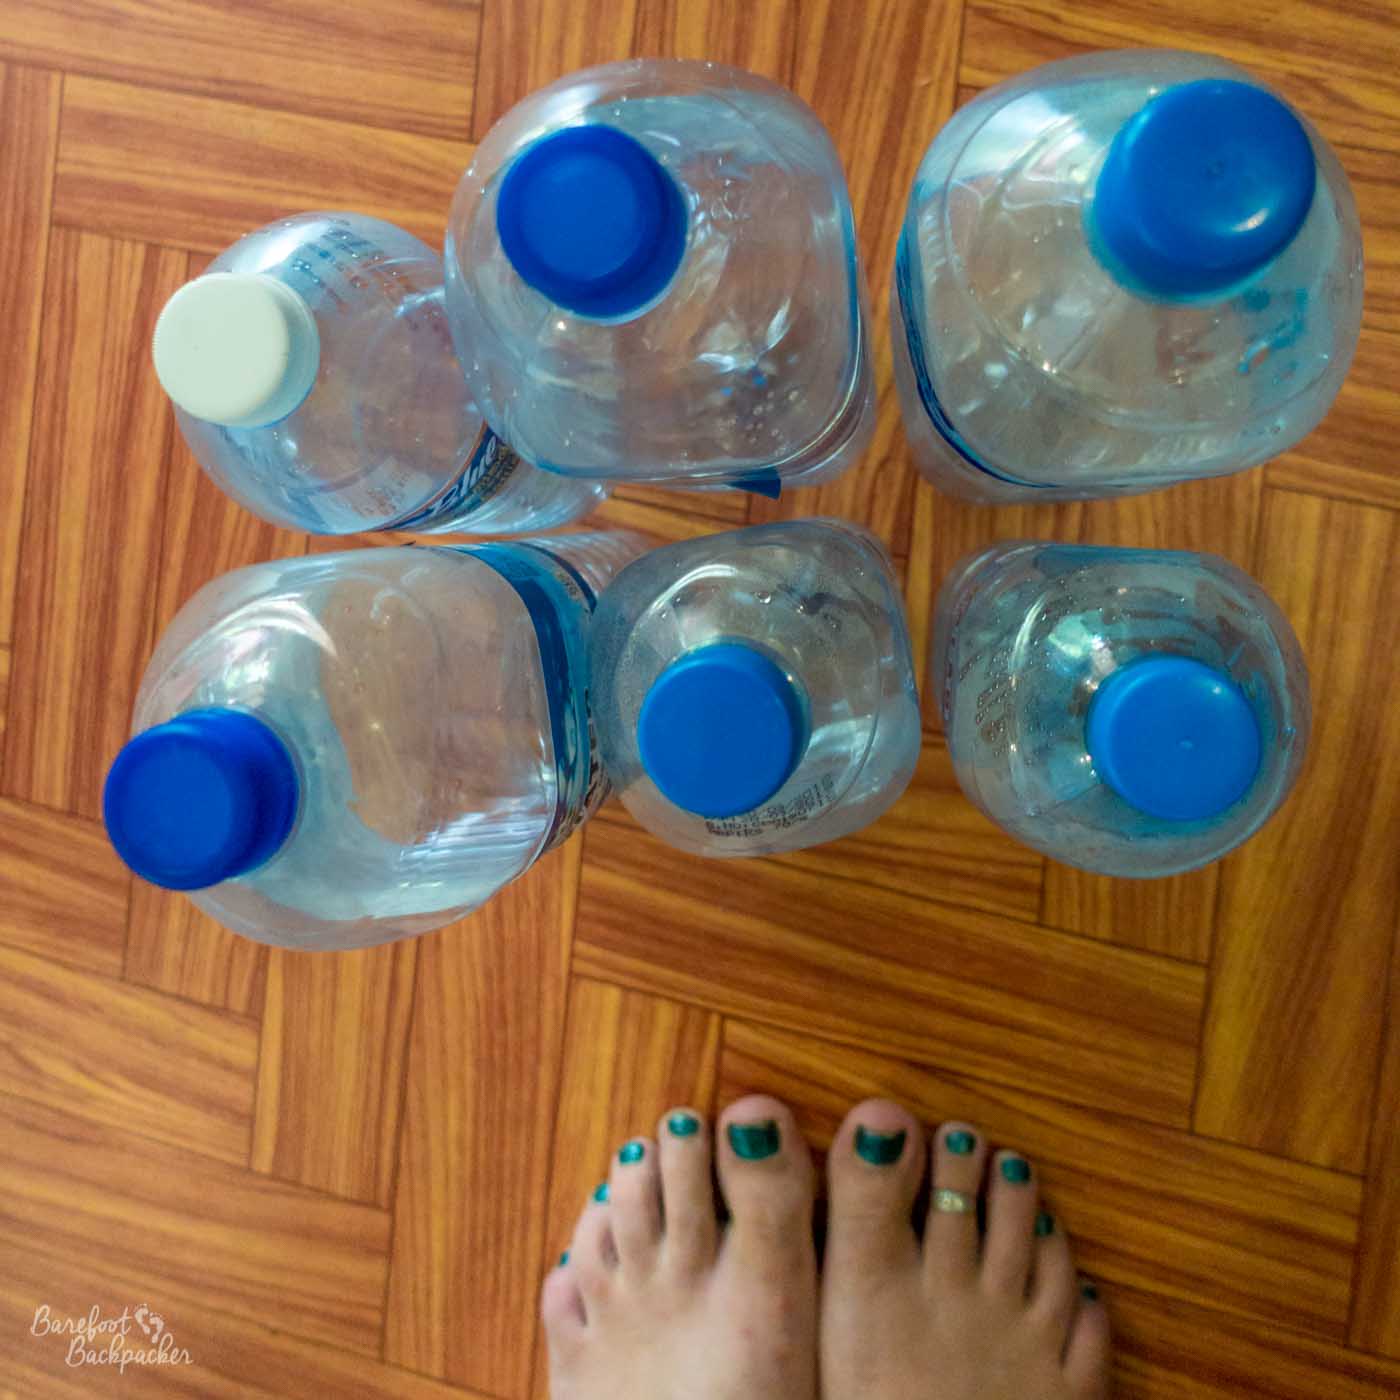 On a parquet floor are six empty plastic single-use water bottles, and below them in shot are the teal-painted toenails and upper parts of two bare feet.